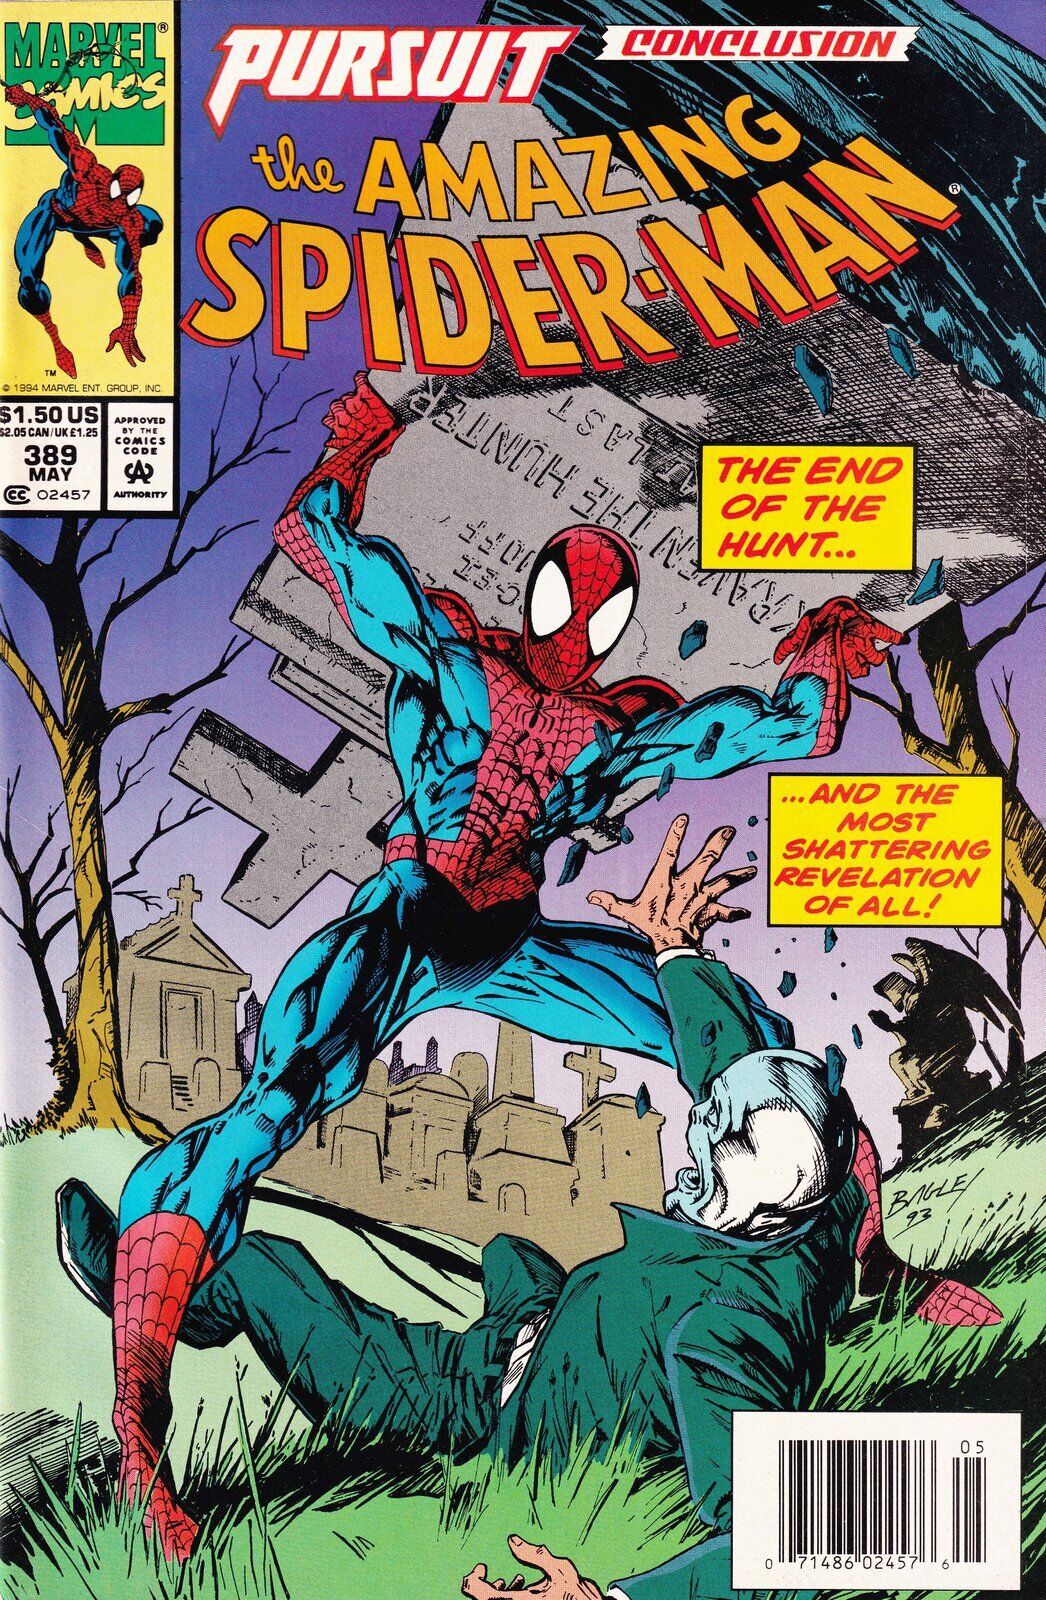 The Amazing Spider-Man #389 Newsstand Cover Marvel Comics